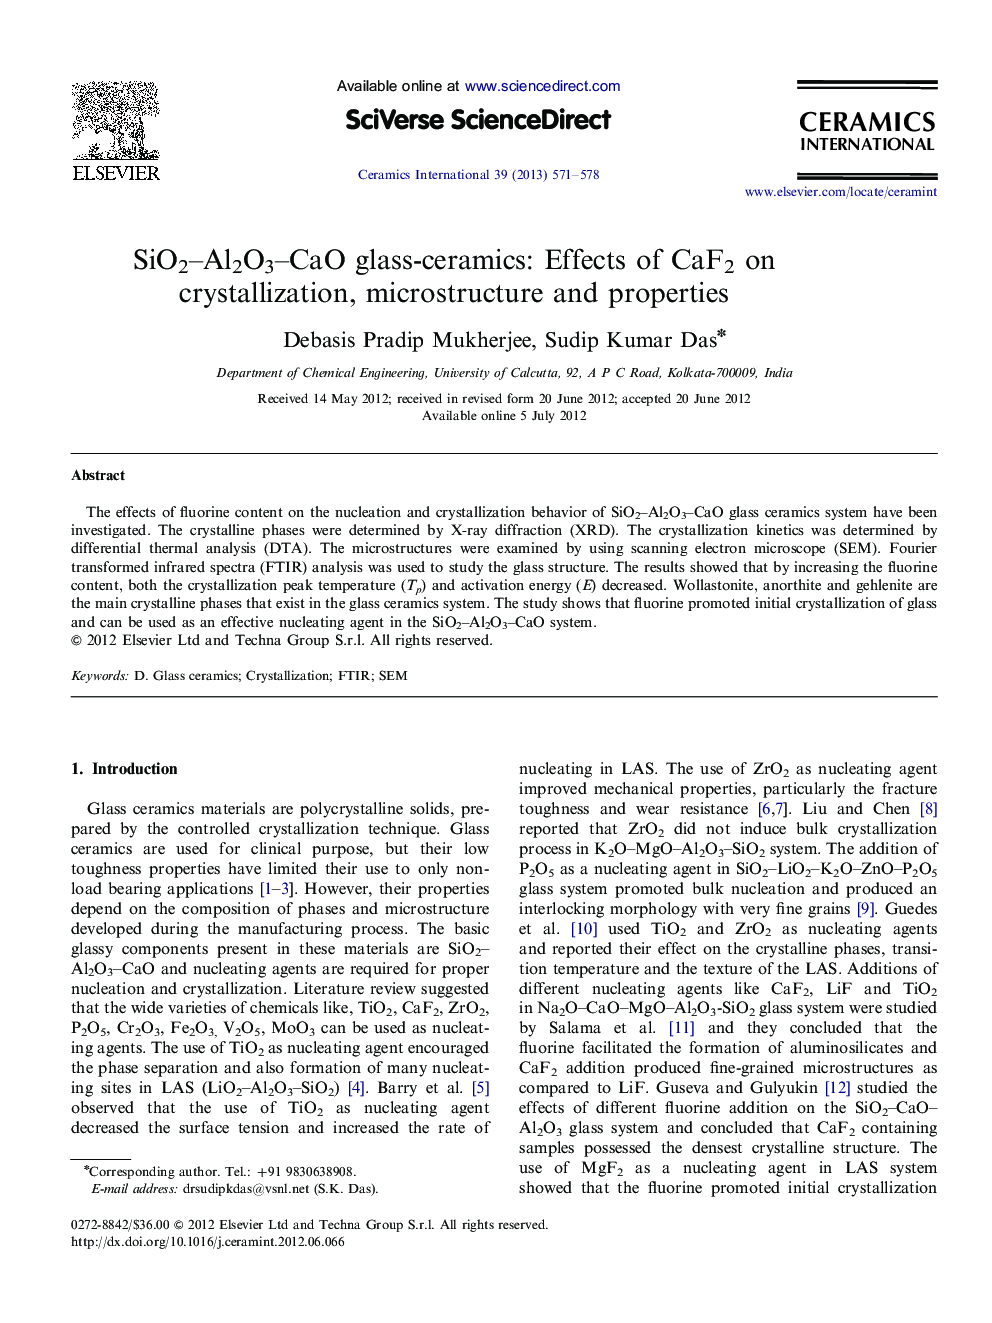 SiO2–Al2O3–CaO glass-ceramics: Effects of CaF2 on crystallization, microstructure and properties